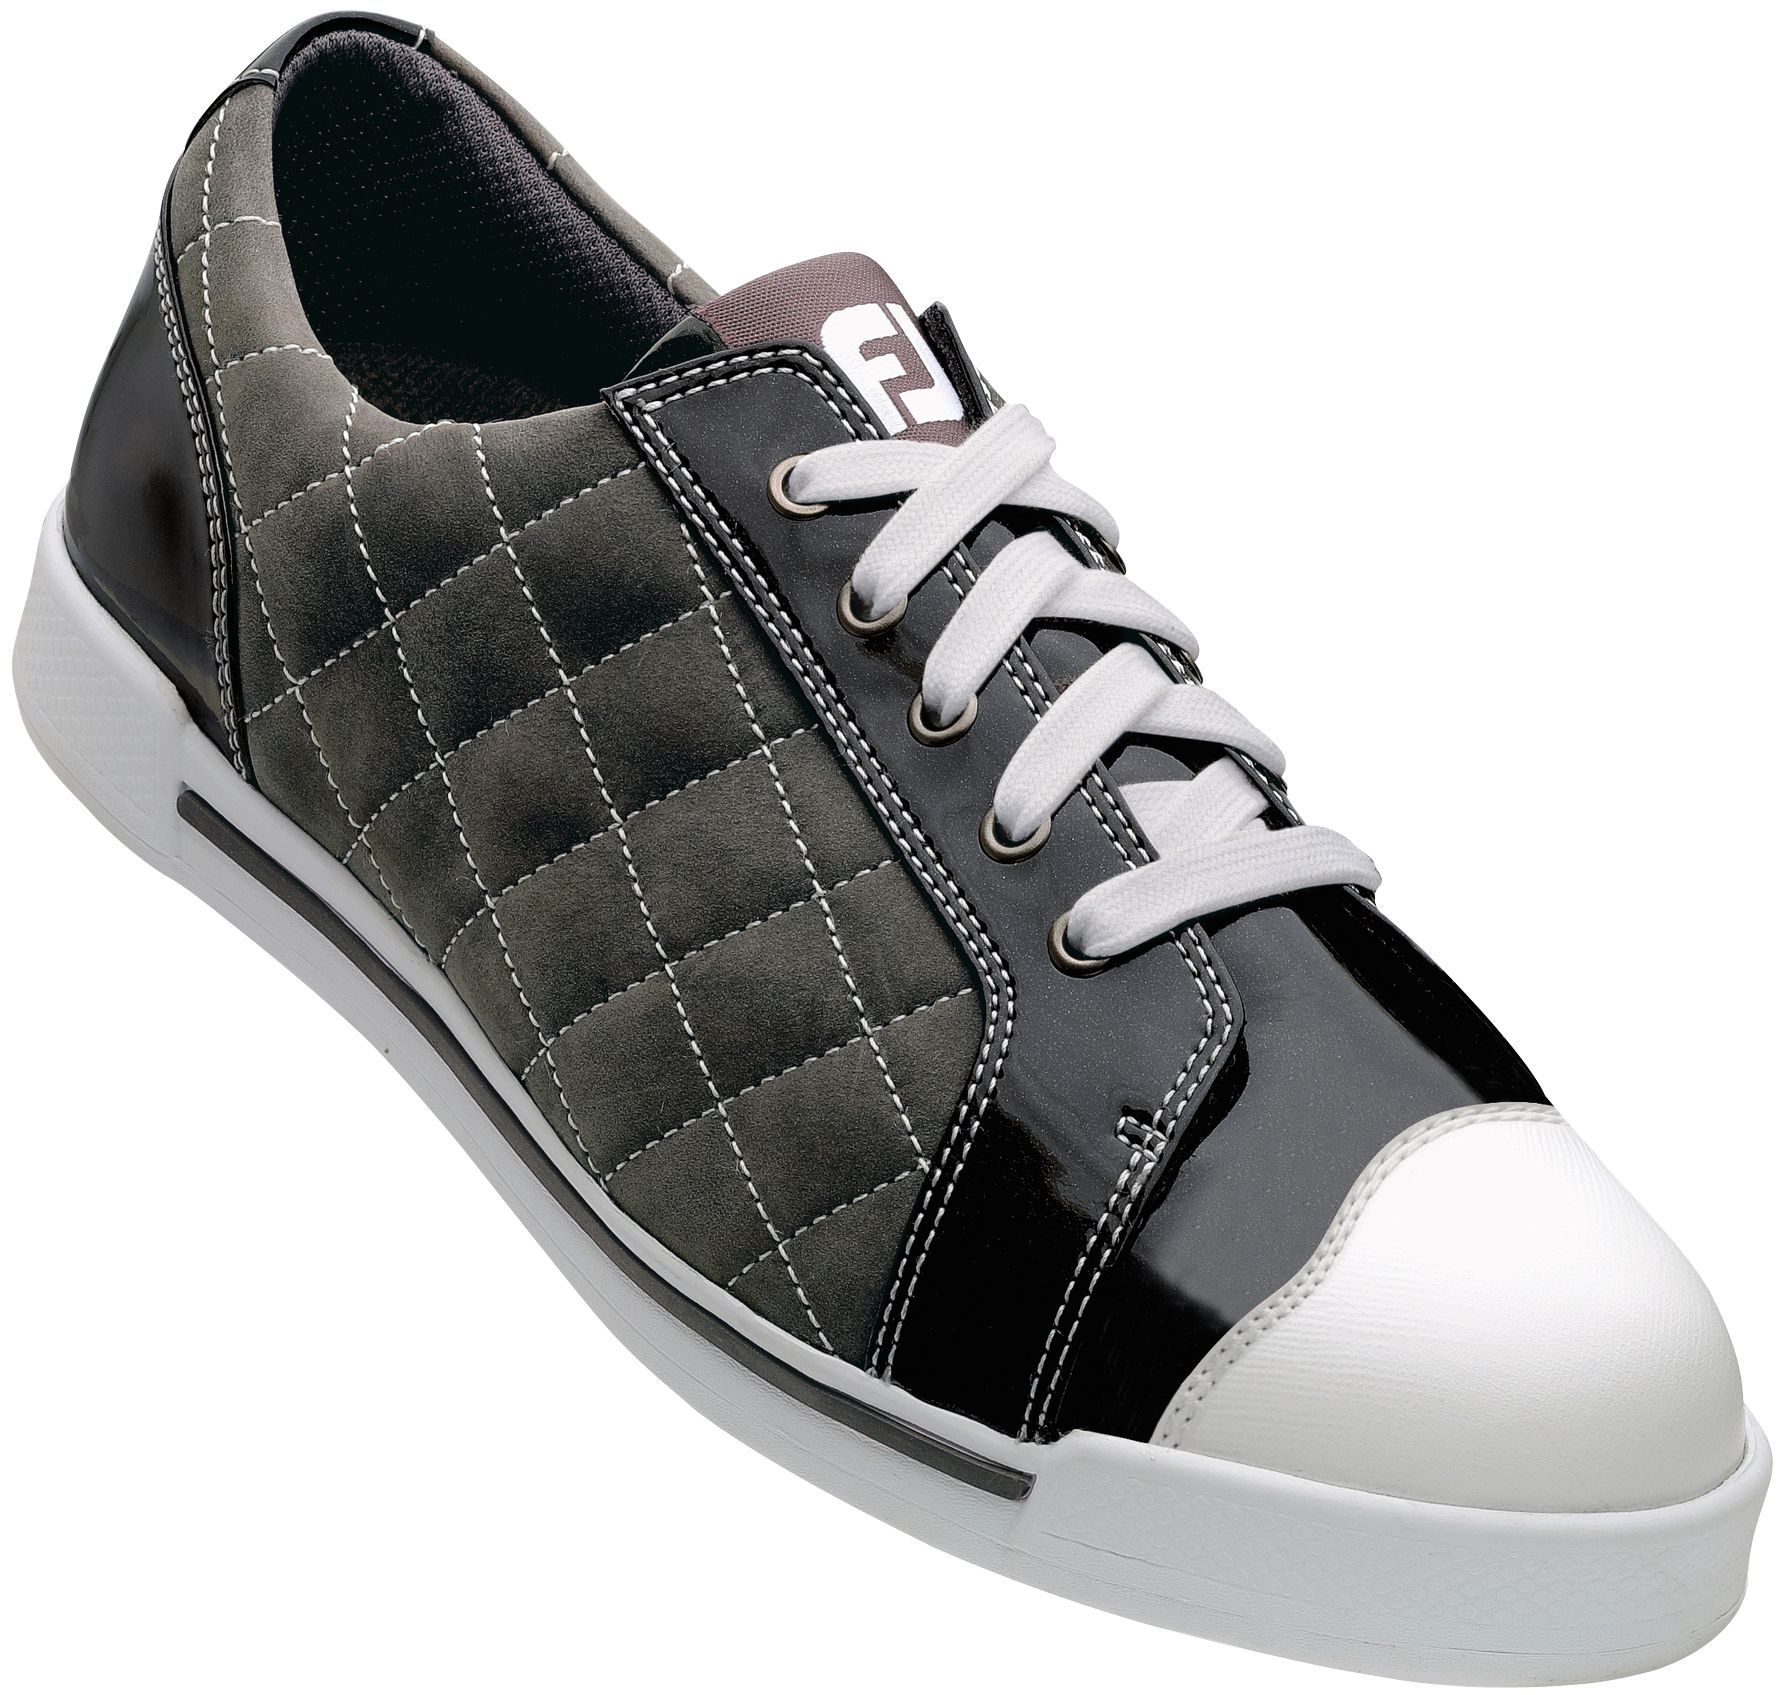 Coolshoe Store on Footjoy Women S Summer Series Golf Shoes   Charcoal White